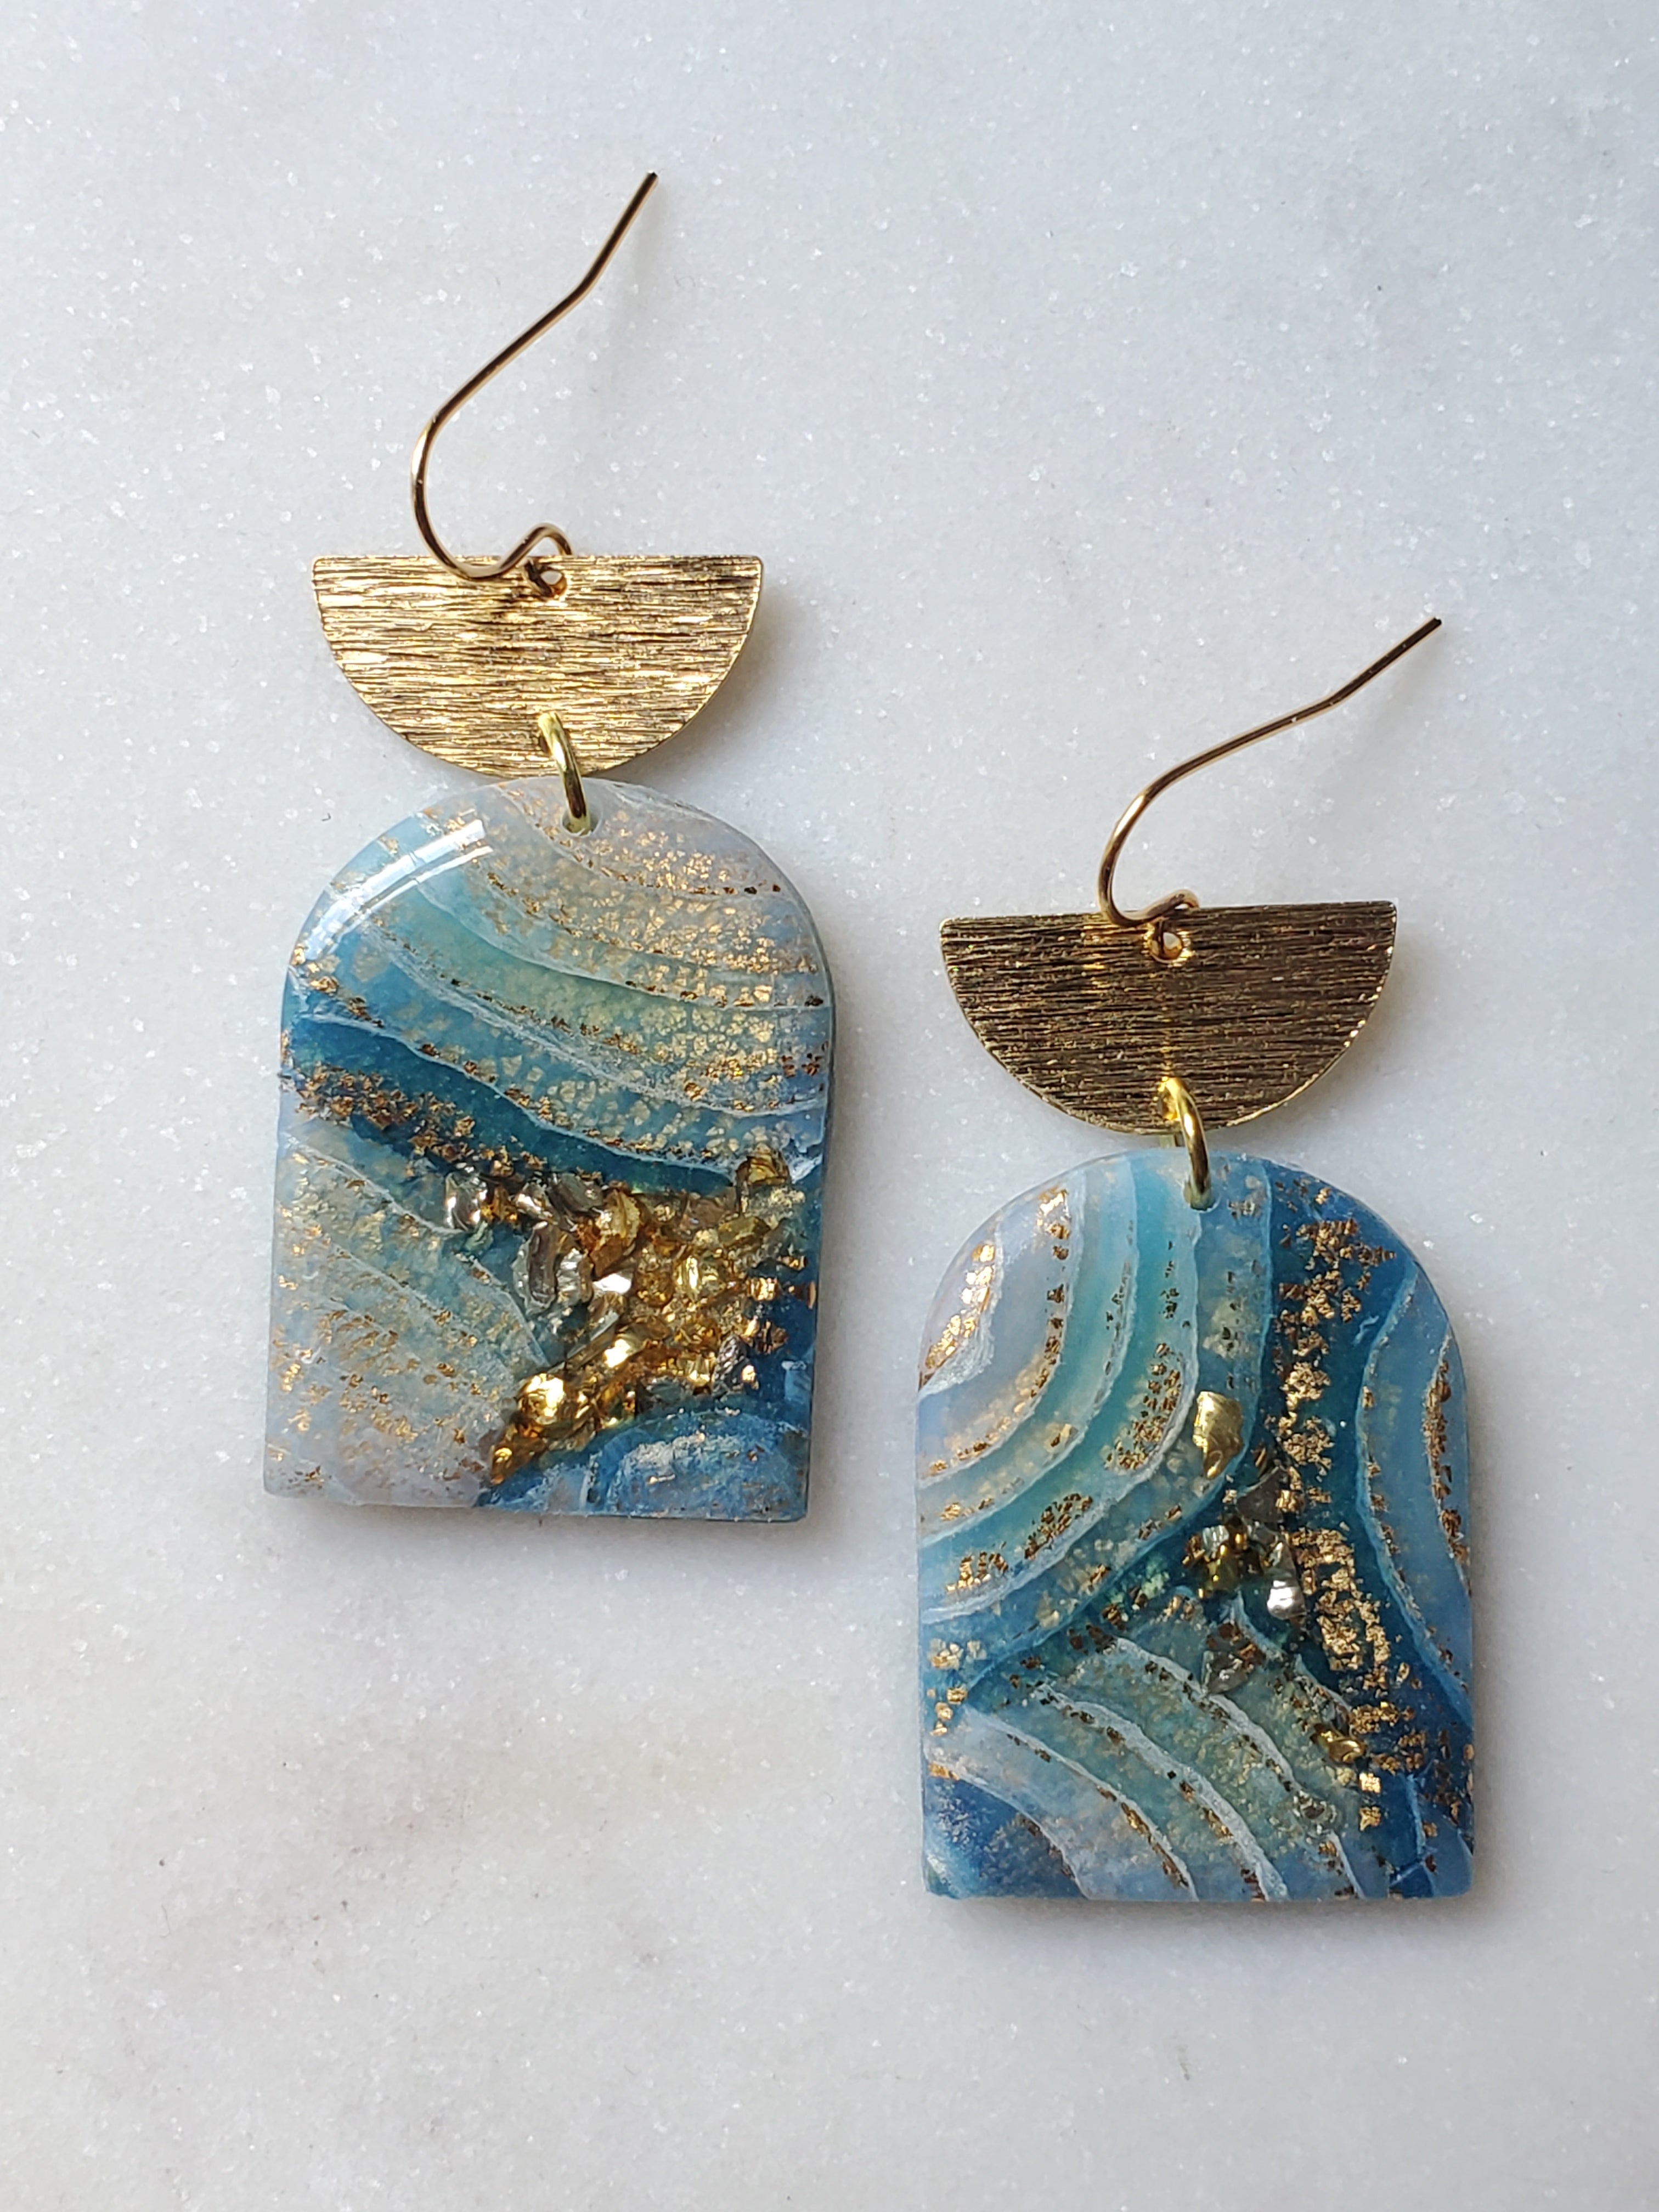 14K Gold Filled Agate Panel Statement Earrings - Blue/Gold